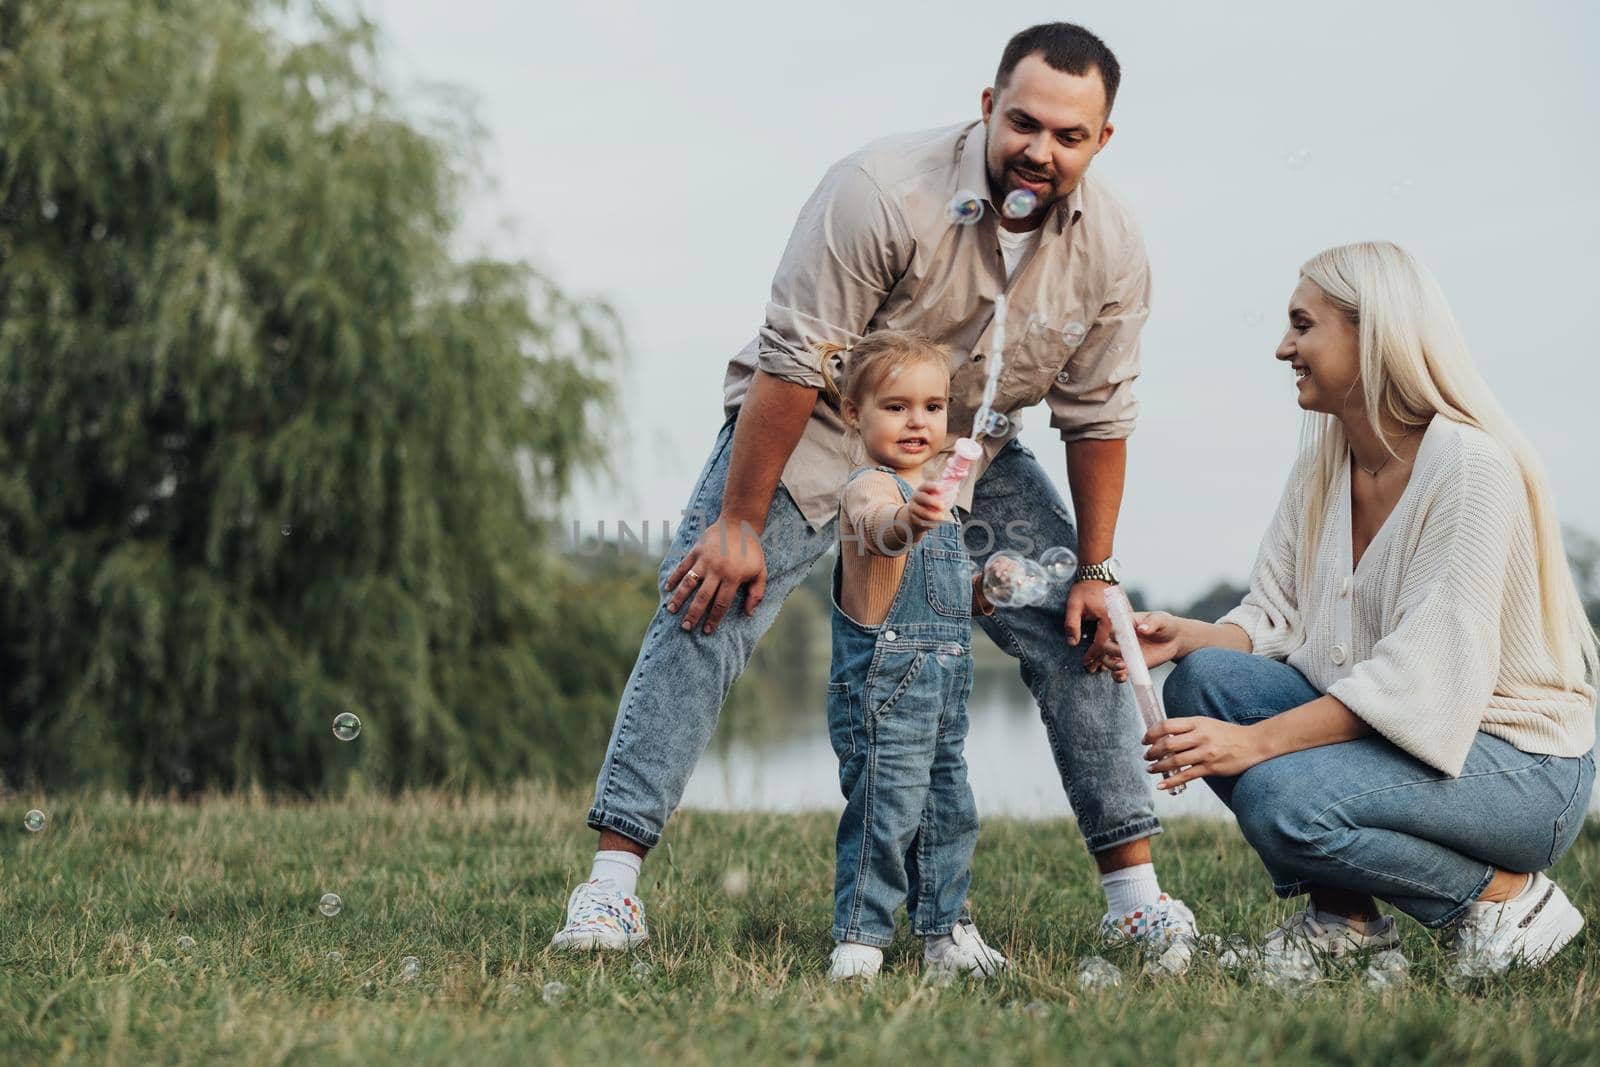 Portrait of Happy Young Family, Mom and Dad with Their Little Daughter Having Fun Outdoors Outside City